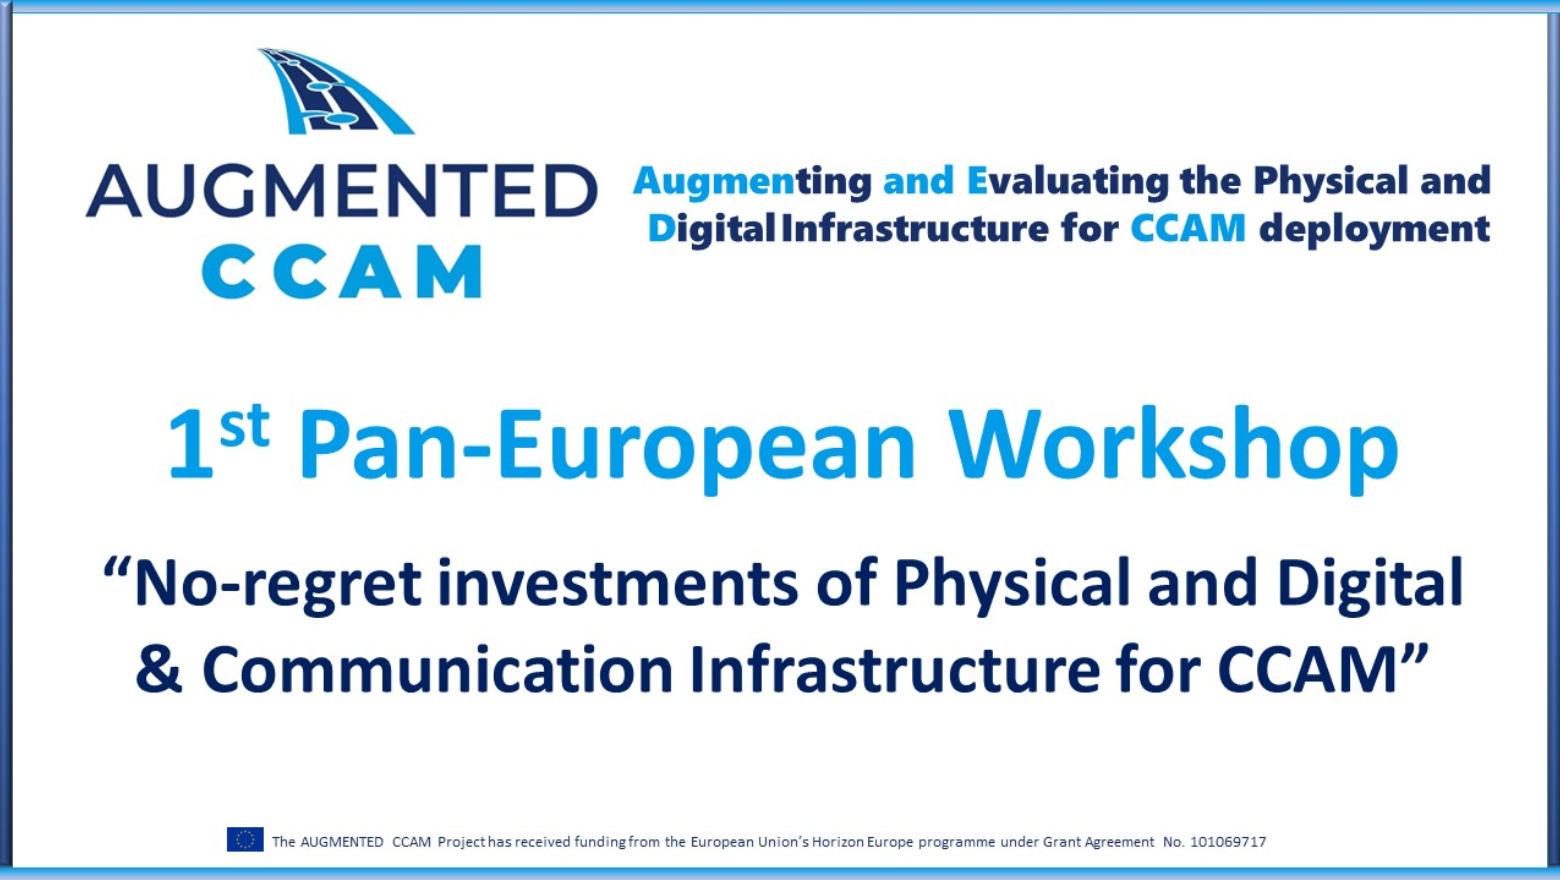 13/09 Workshop “No-regret investments of Physical and Digital & Communication Infrastructure for CCAM”